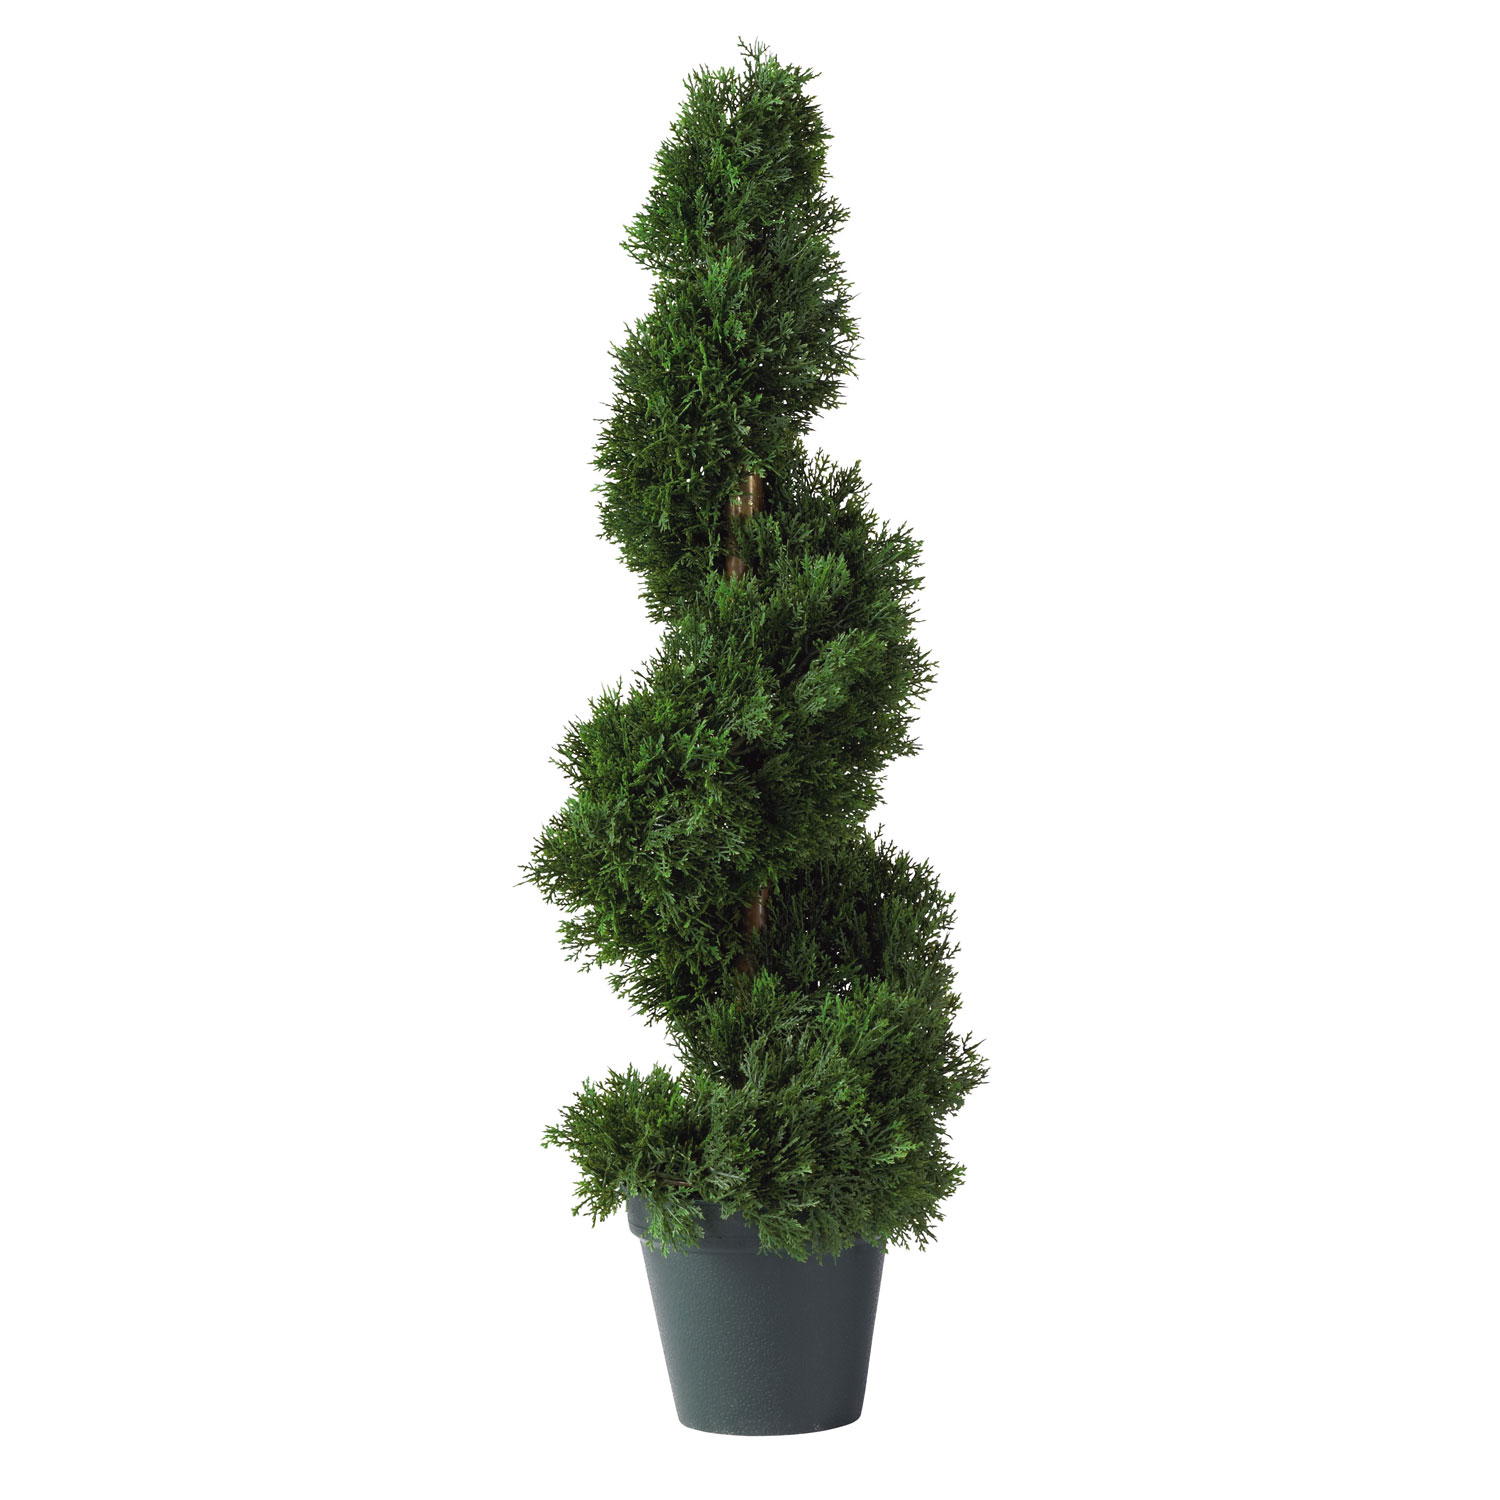 2 Foot Cedar Spiral Topiary: Potted